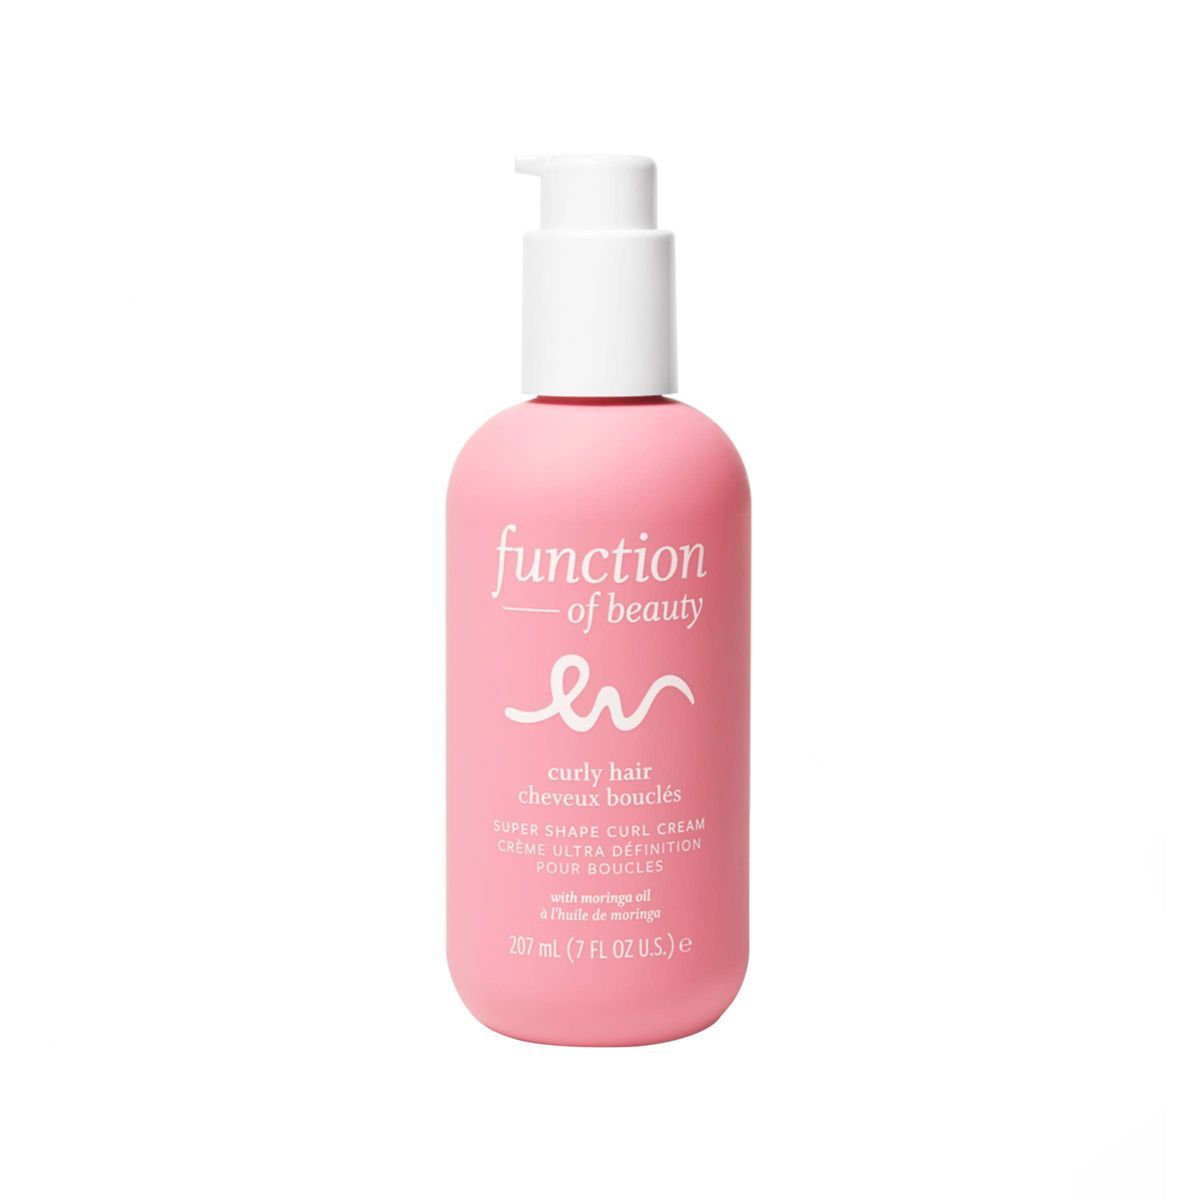 Function of Beauty Super Shape Curl Cream for Curly Hair - 7 fl oz | Target